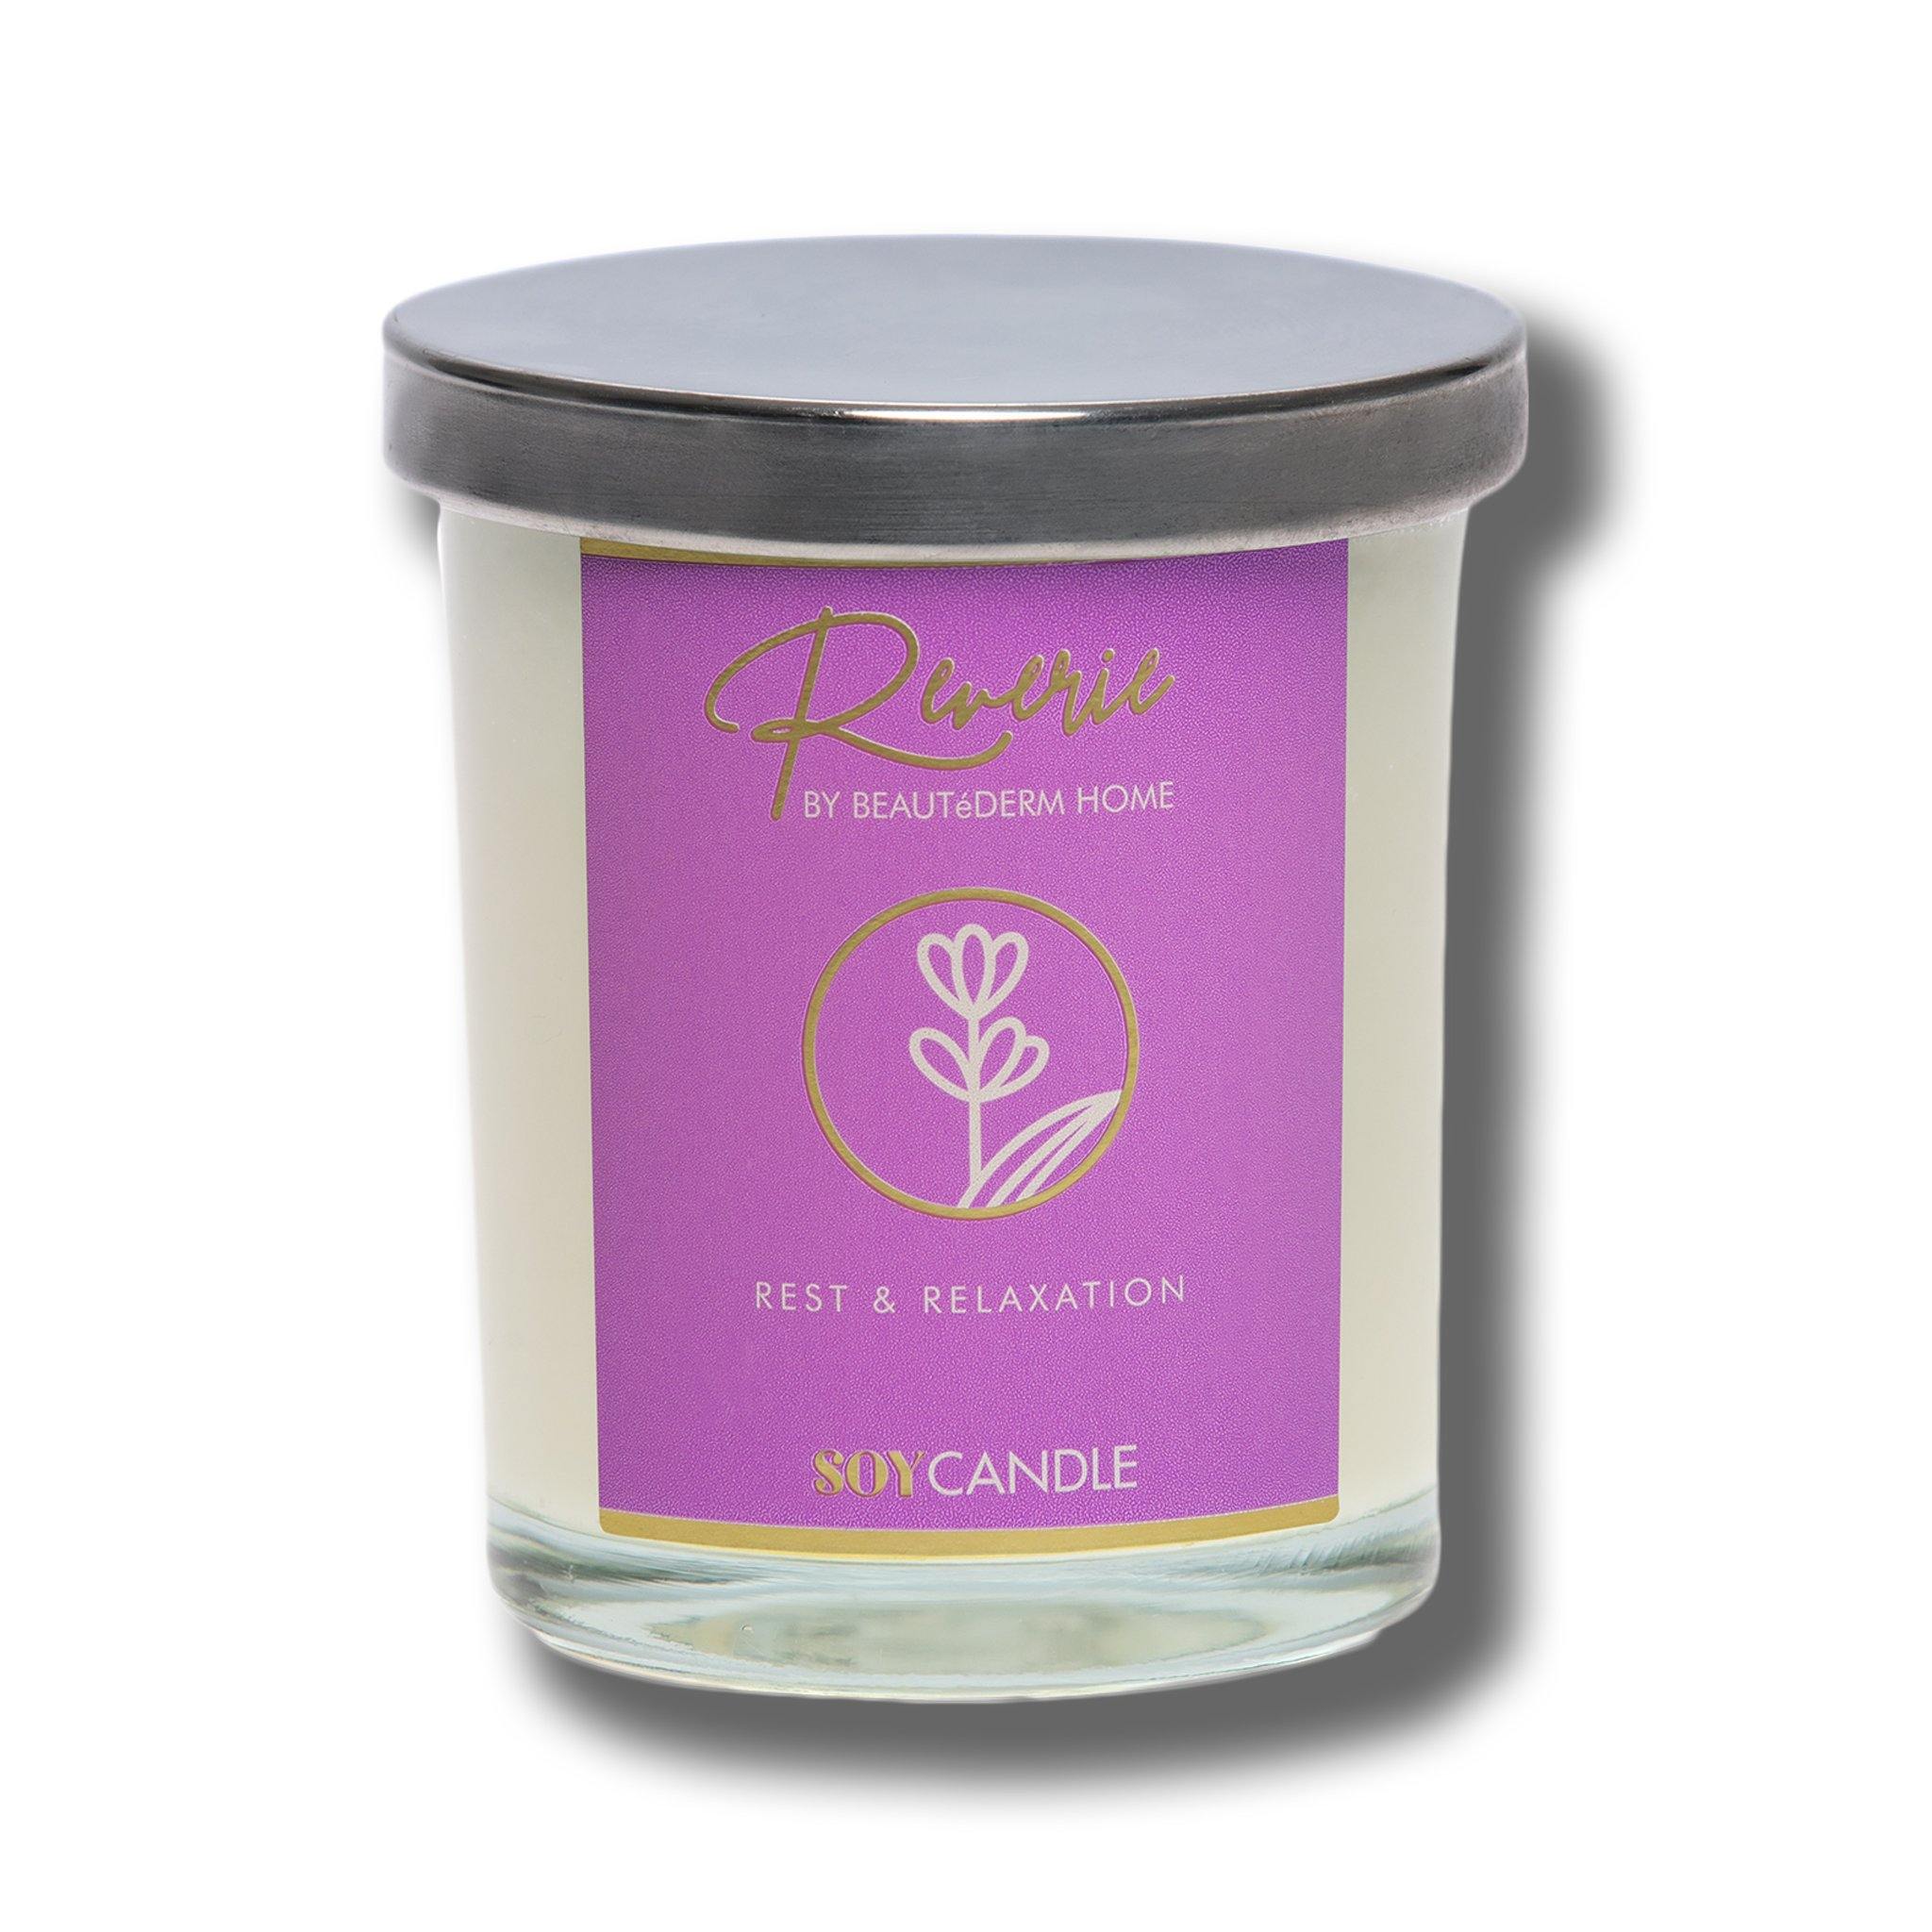 Soy Candle, Rest & Relaxation (Lavender Scent), Reverie by Beautederm Home